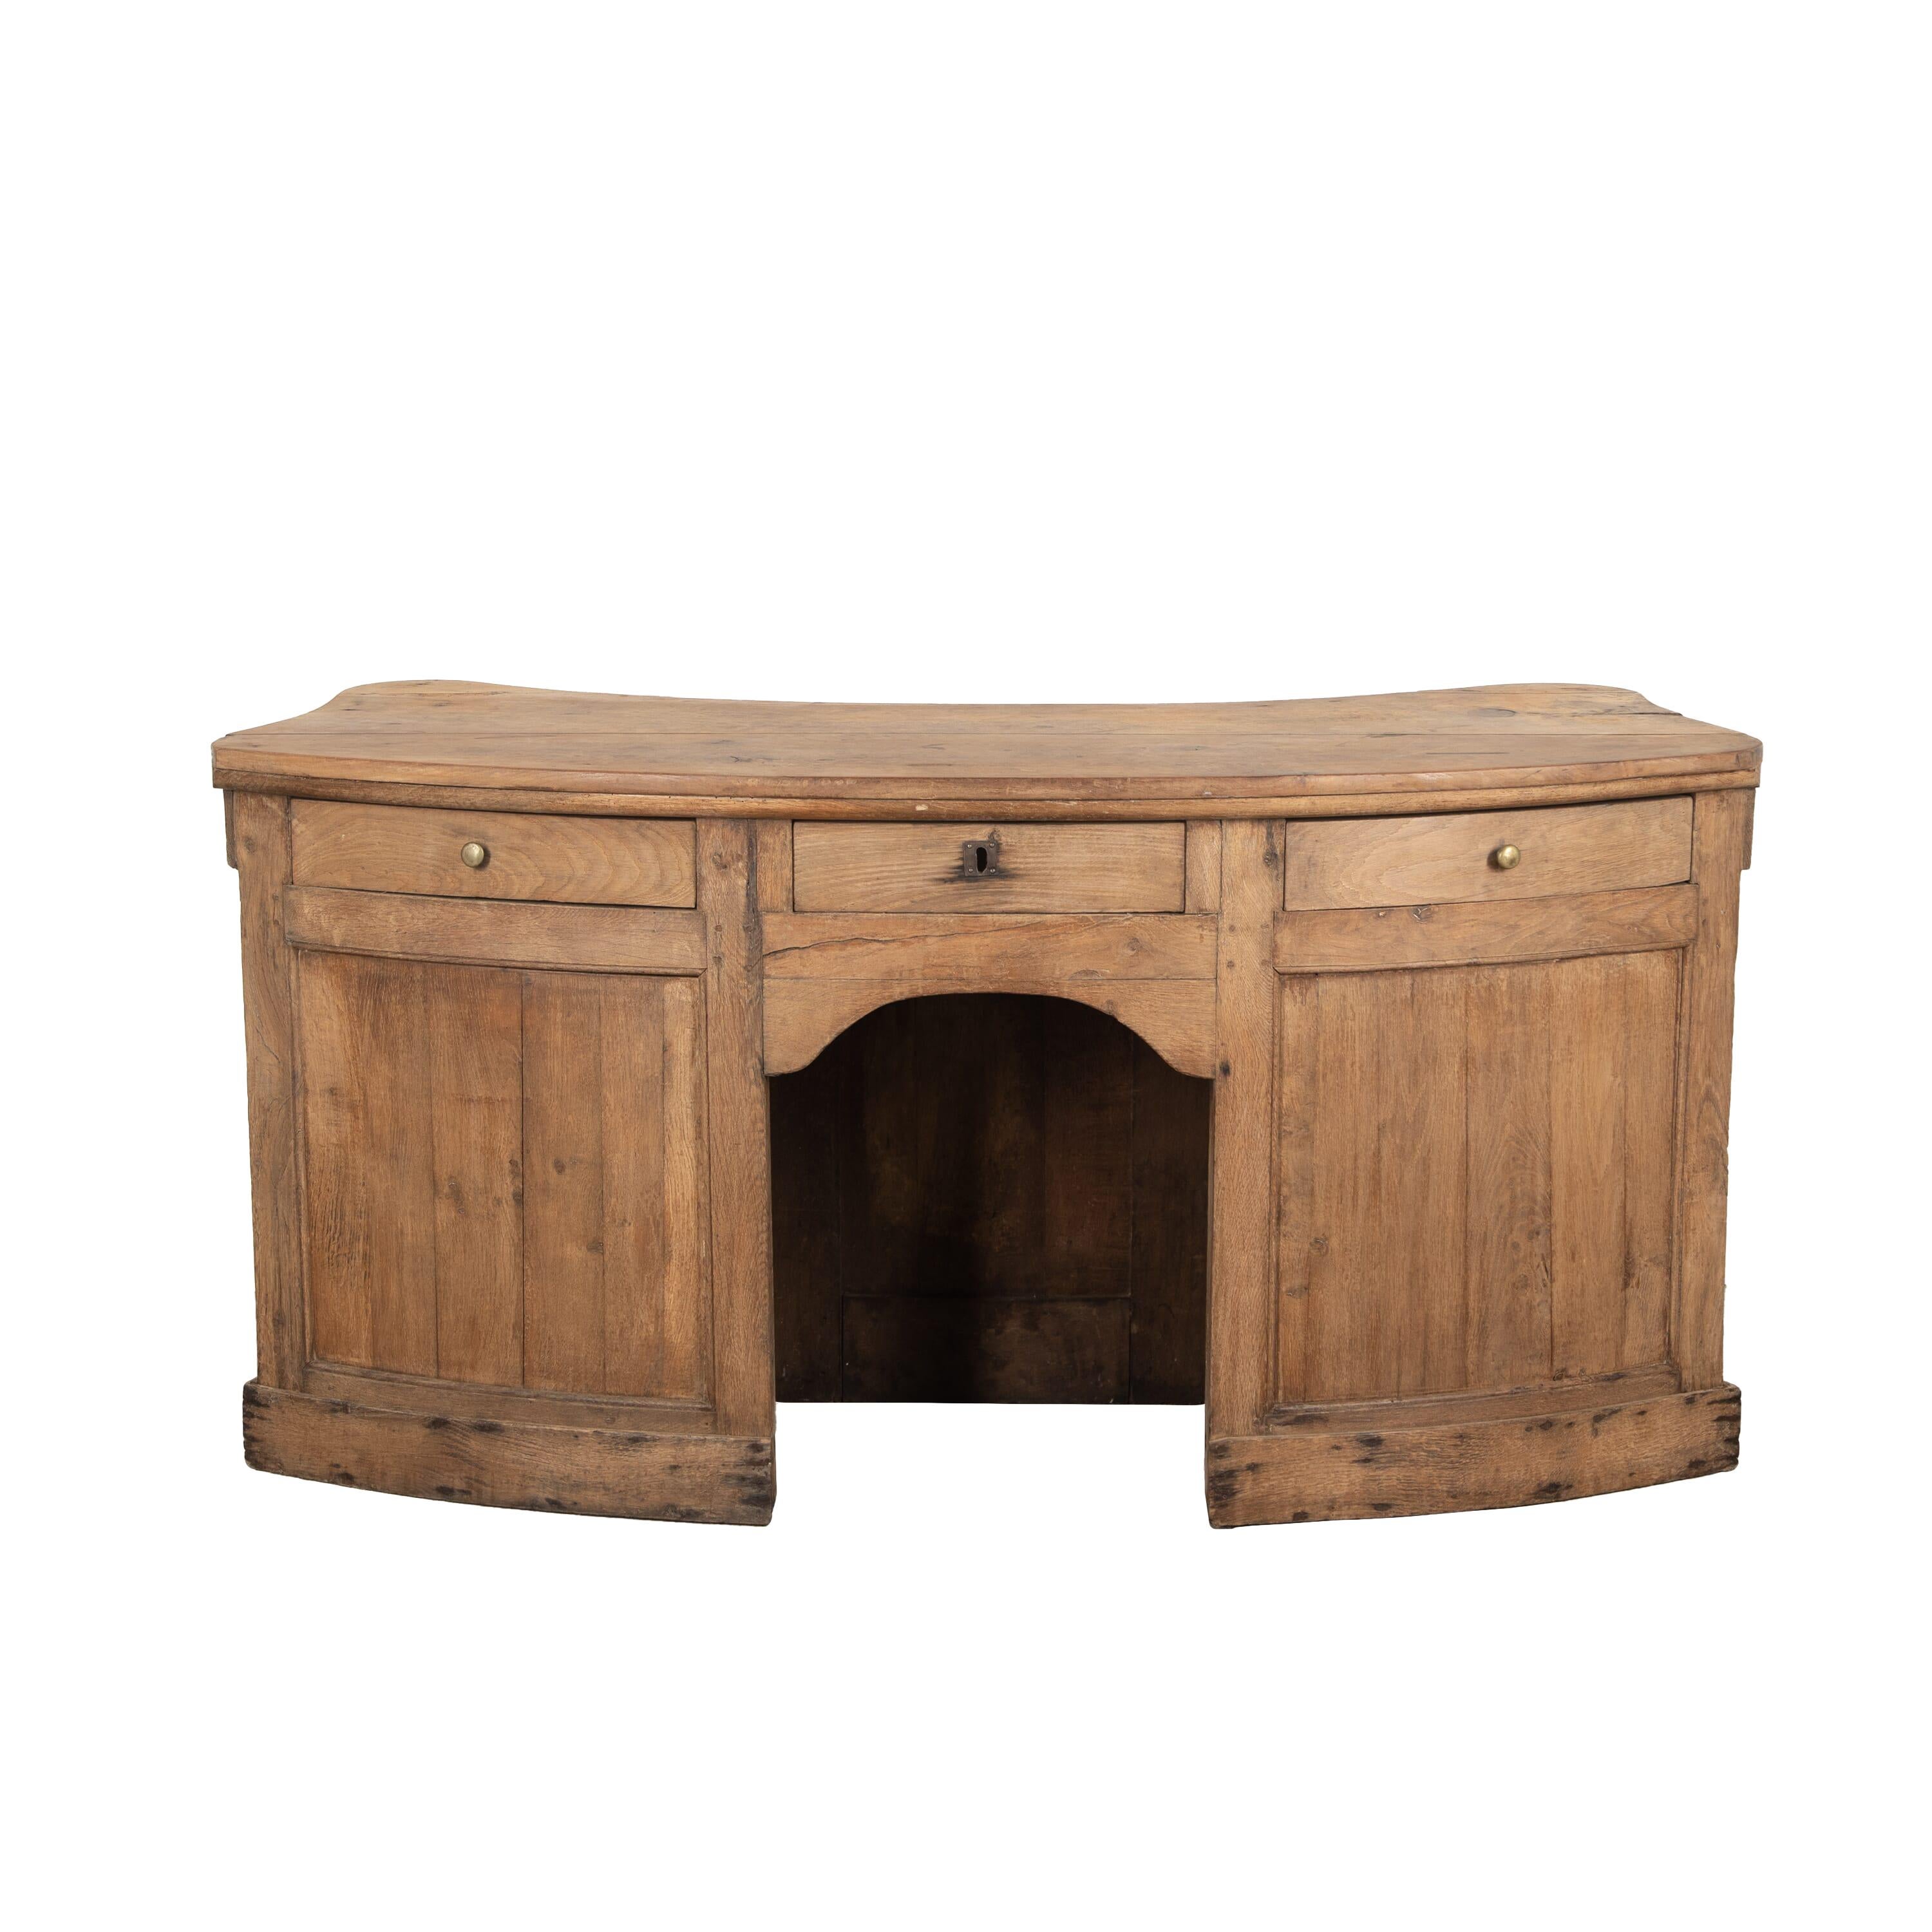 19th Century French oak shop counter.
With an exceptional curved shape with column detailing to the front. Behind three useful storage drawers and a space for a use as a desk.
circa 1840.